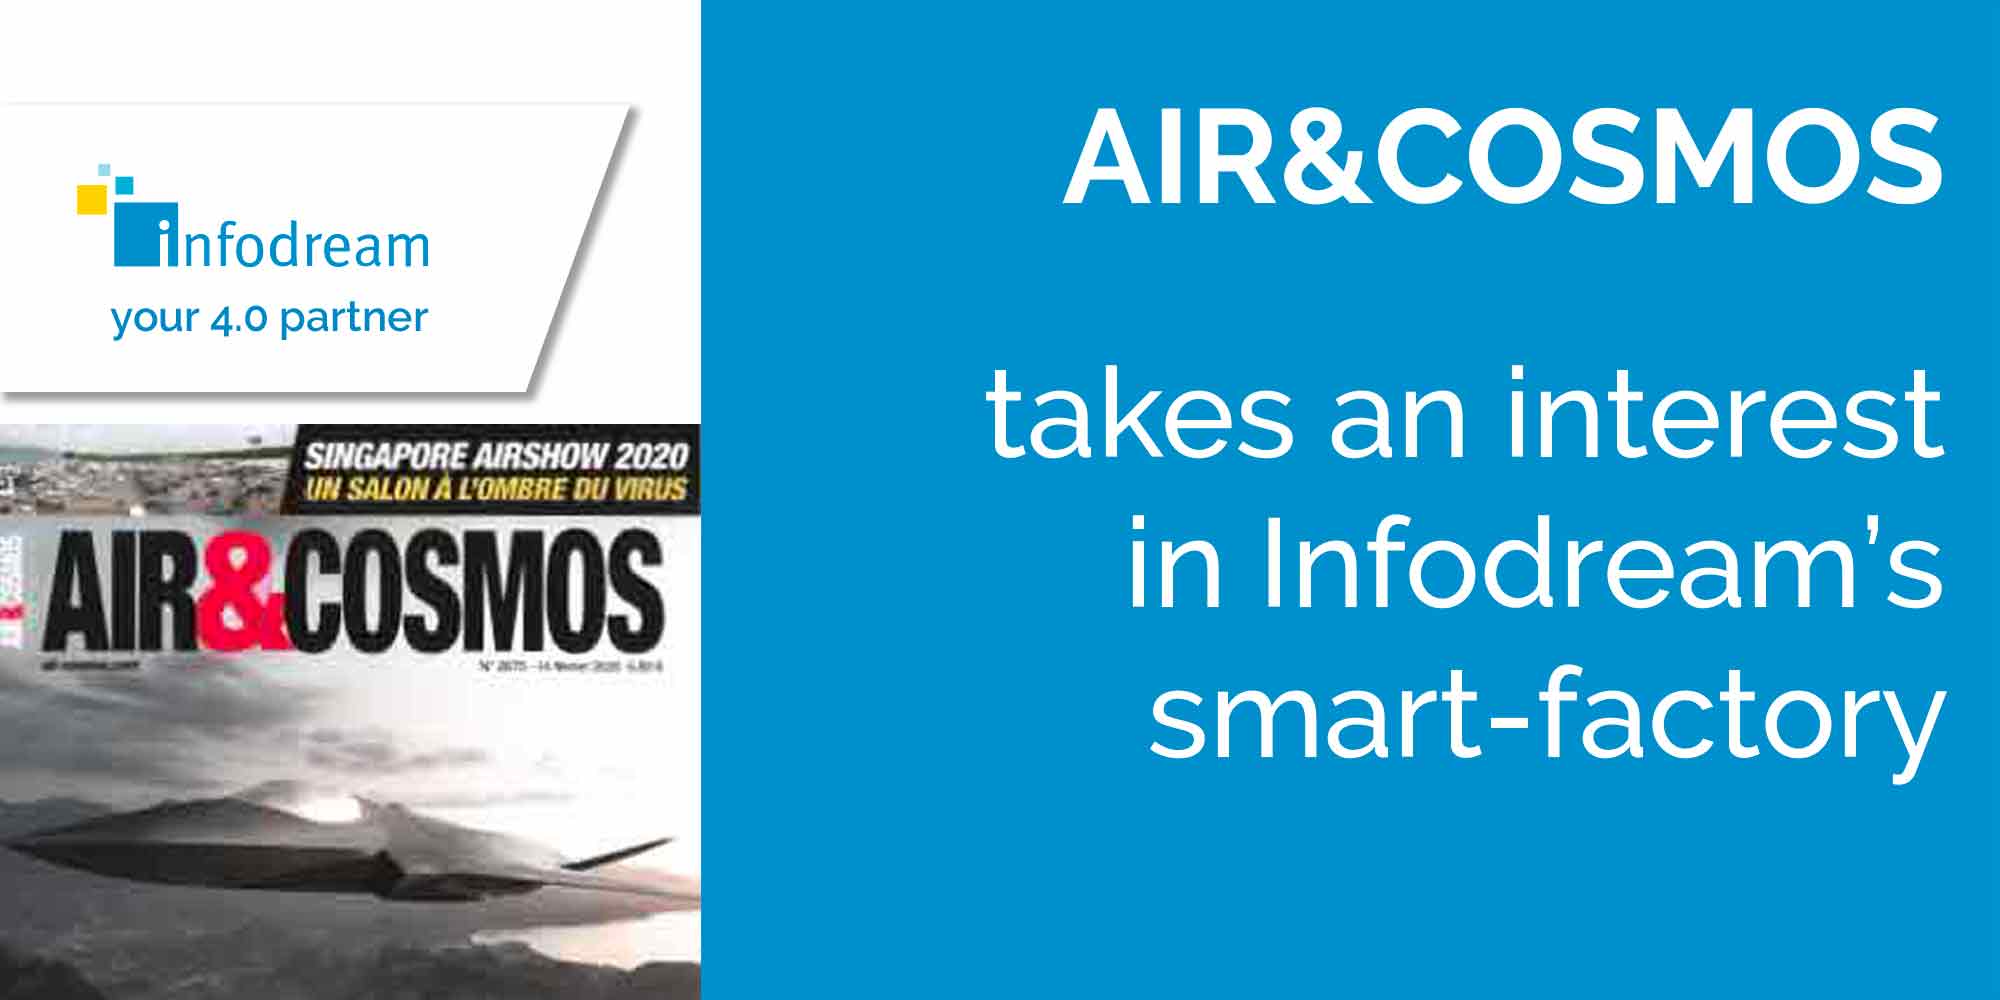 Air&cosmos Takes An Interest In Infodream's Smart-factory